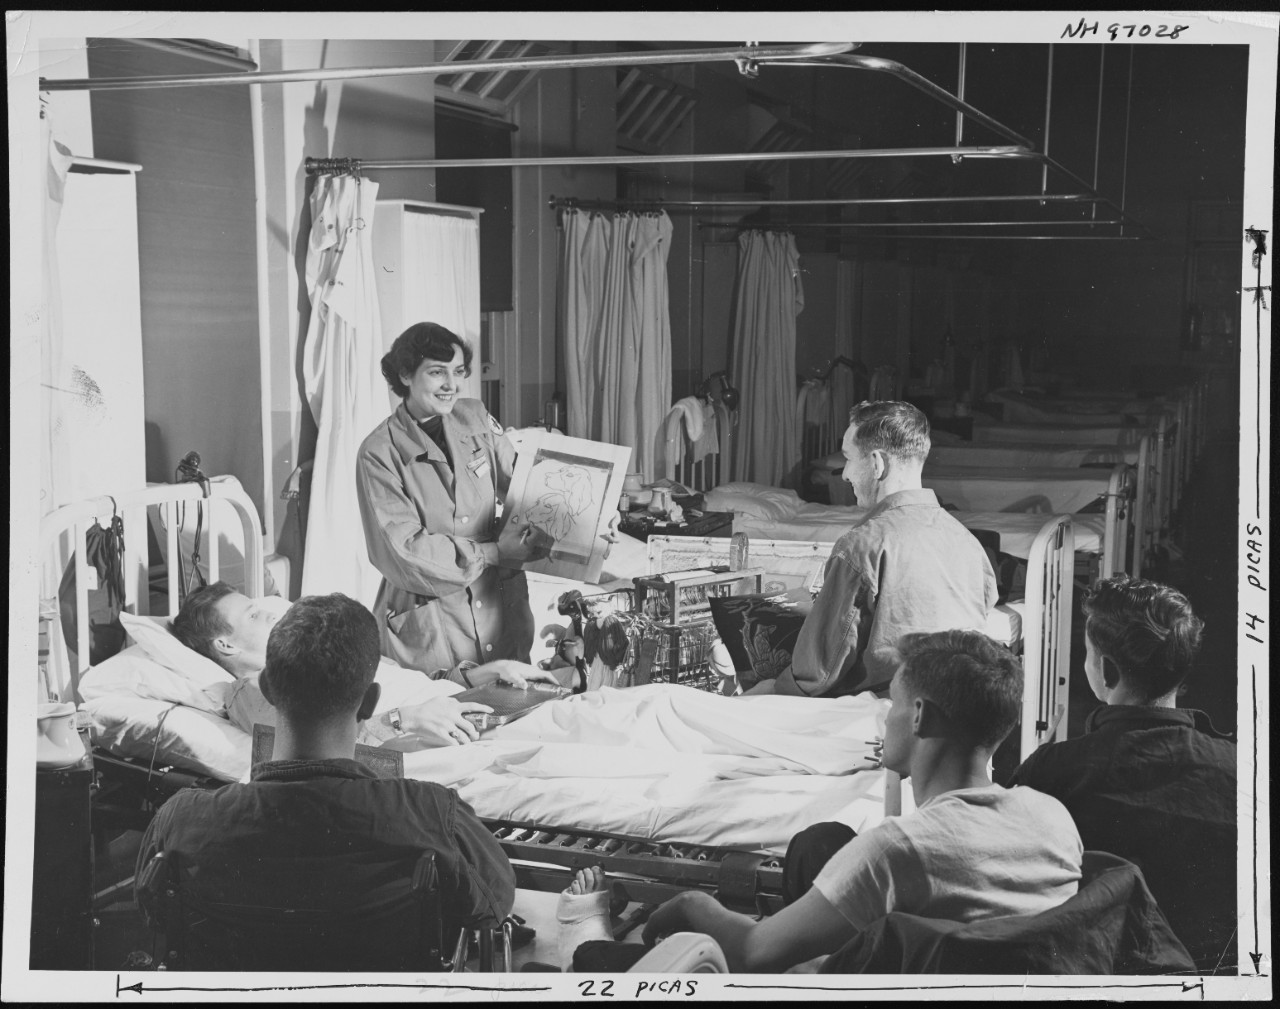 Photo #: NH 97028  Red Cross Worker at a Military Hospital, 1951